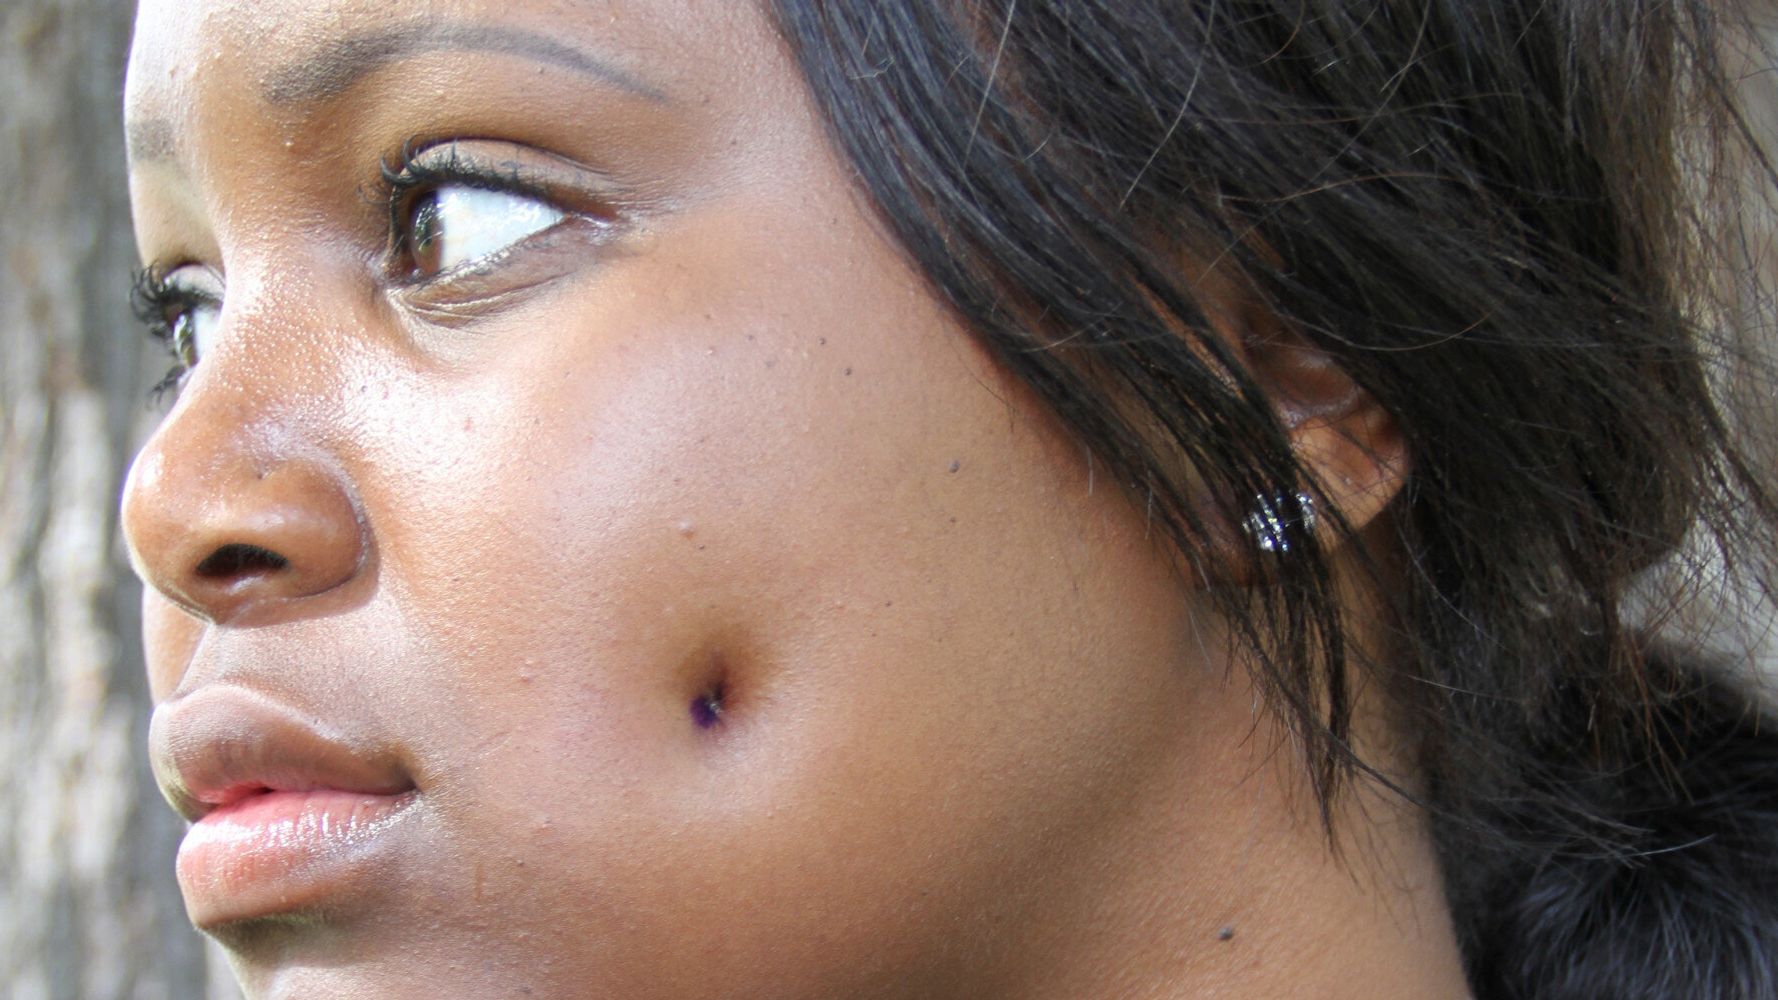 Dimpleplasty Woman Gets £1500 Cheek Piercing Surgery To Get Dimples